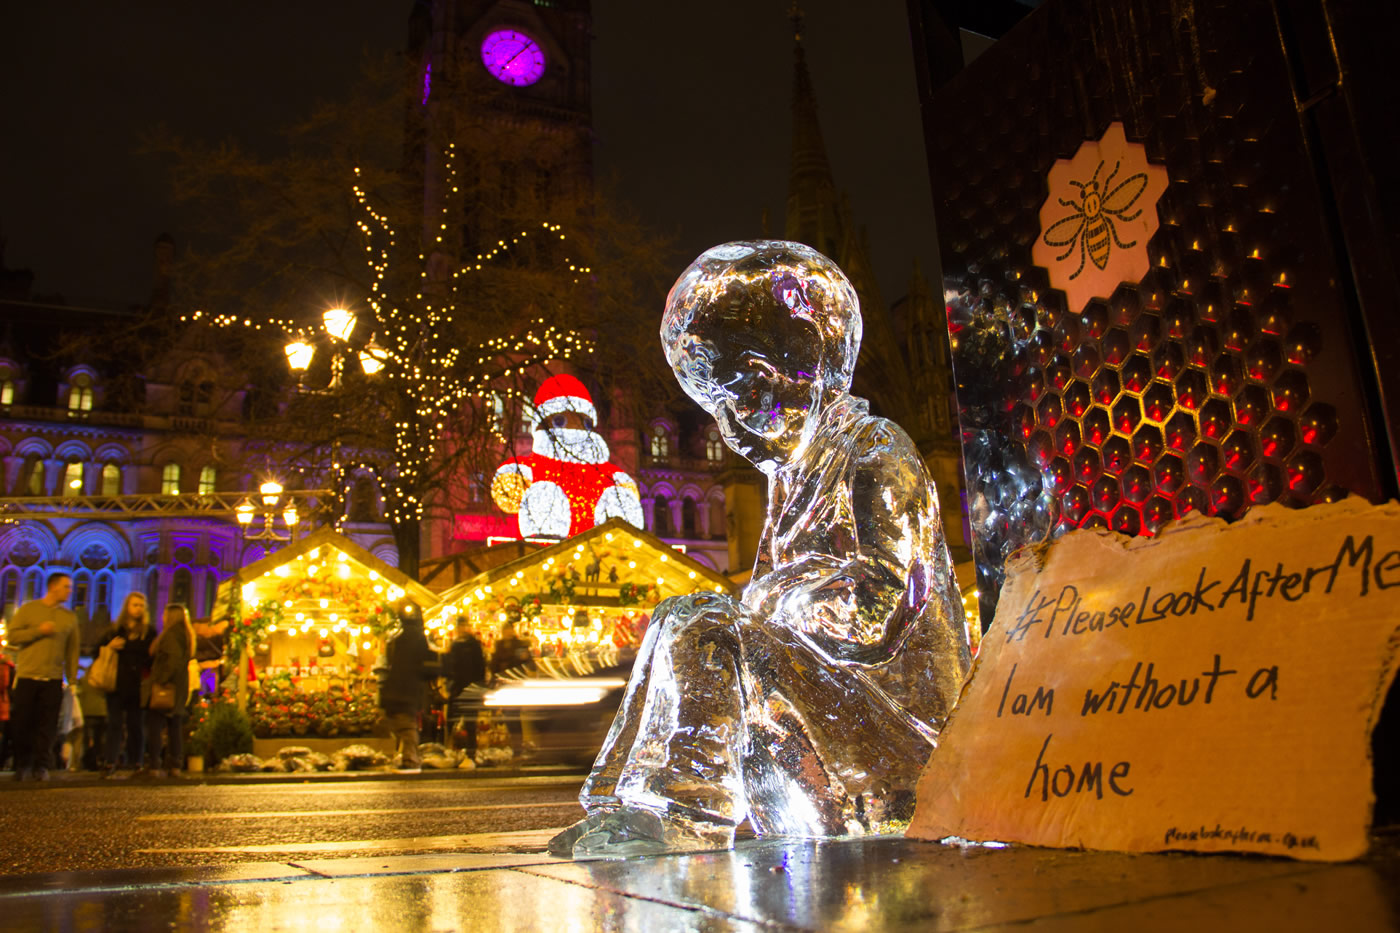 No.4 ice sculpture from Please Look After Me outside the Manchester Christmas Markets